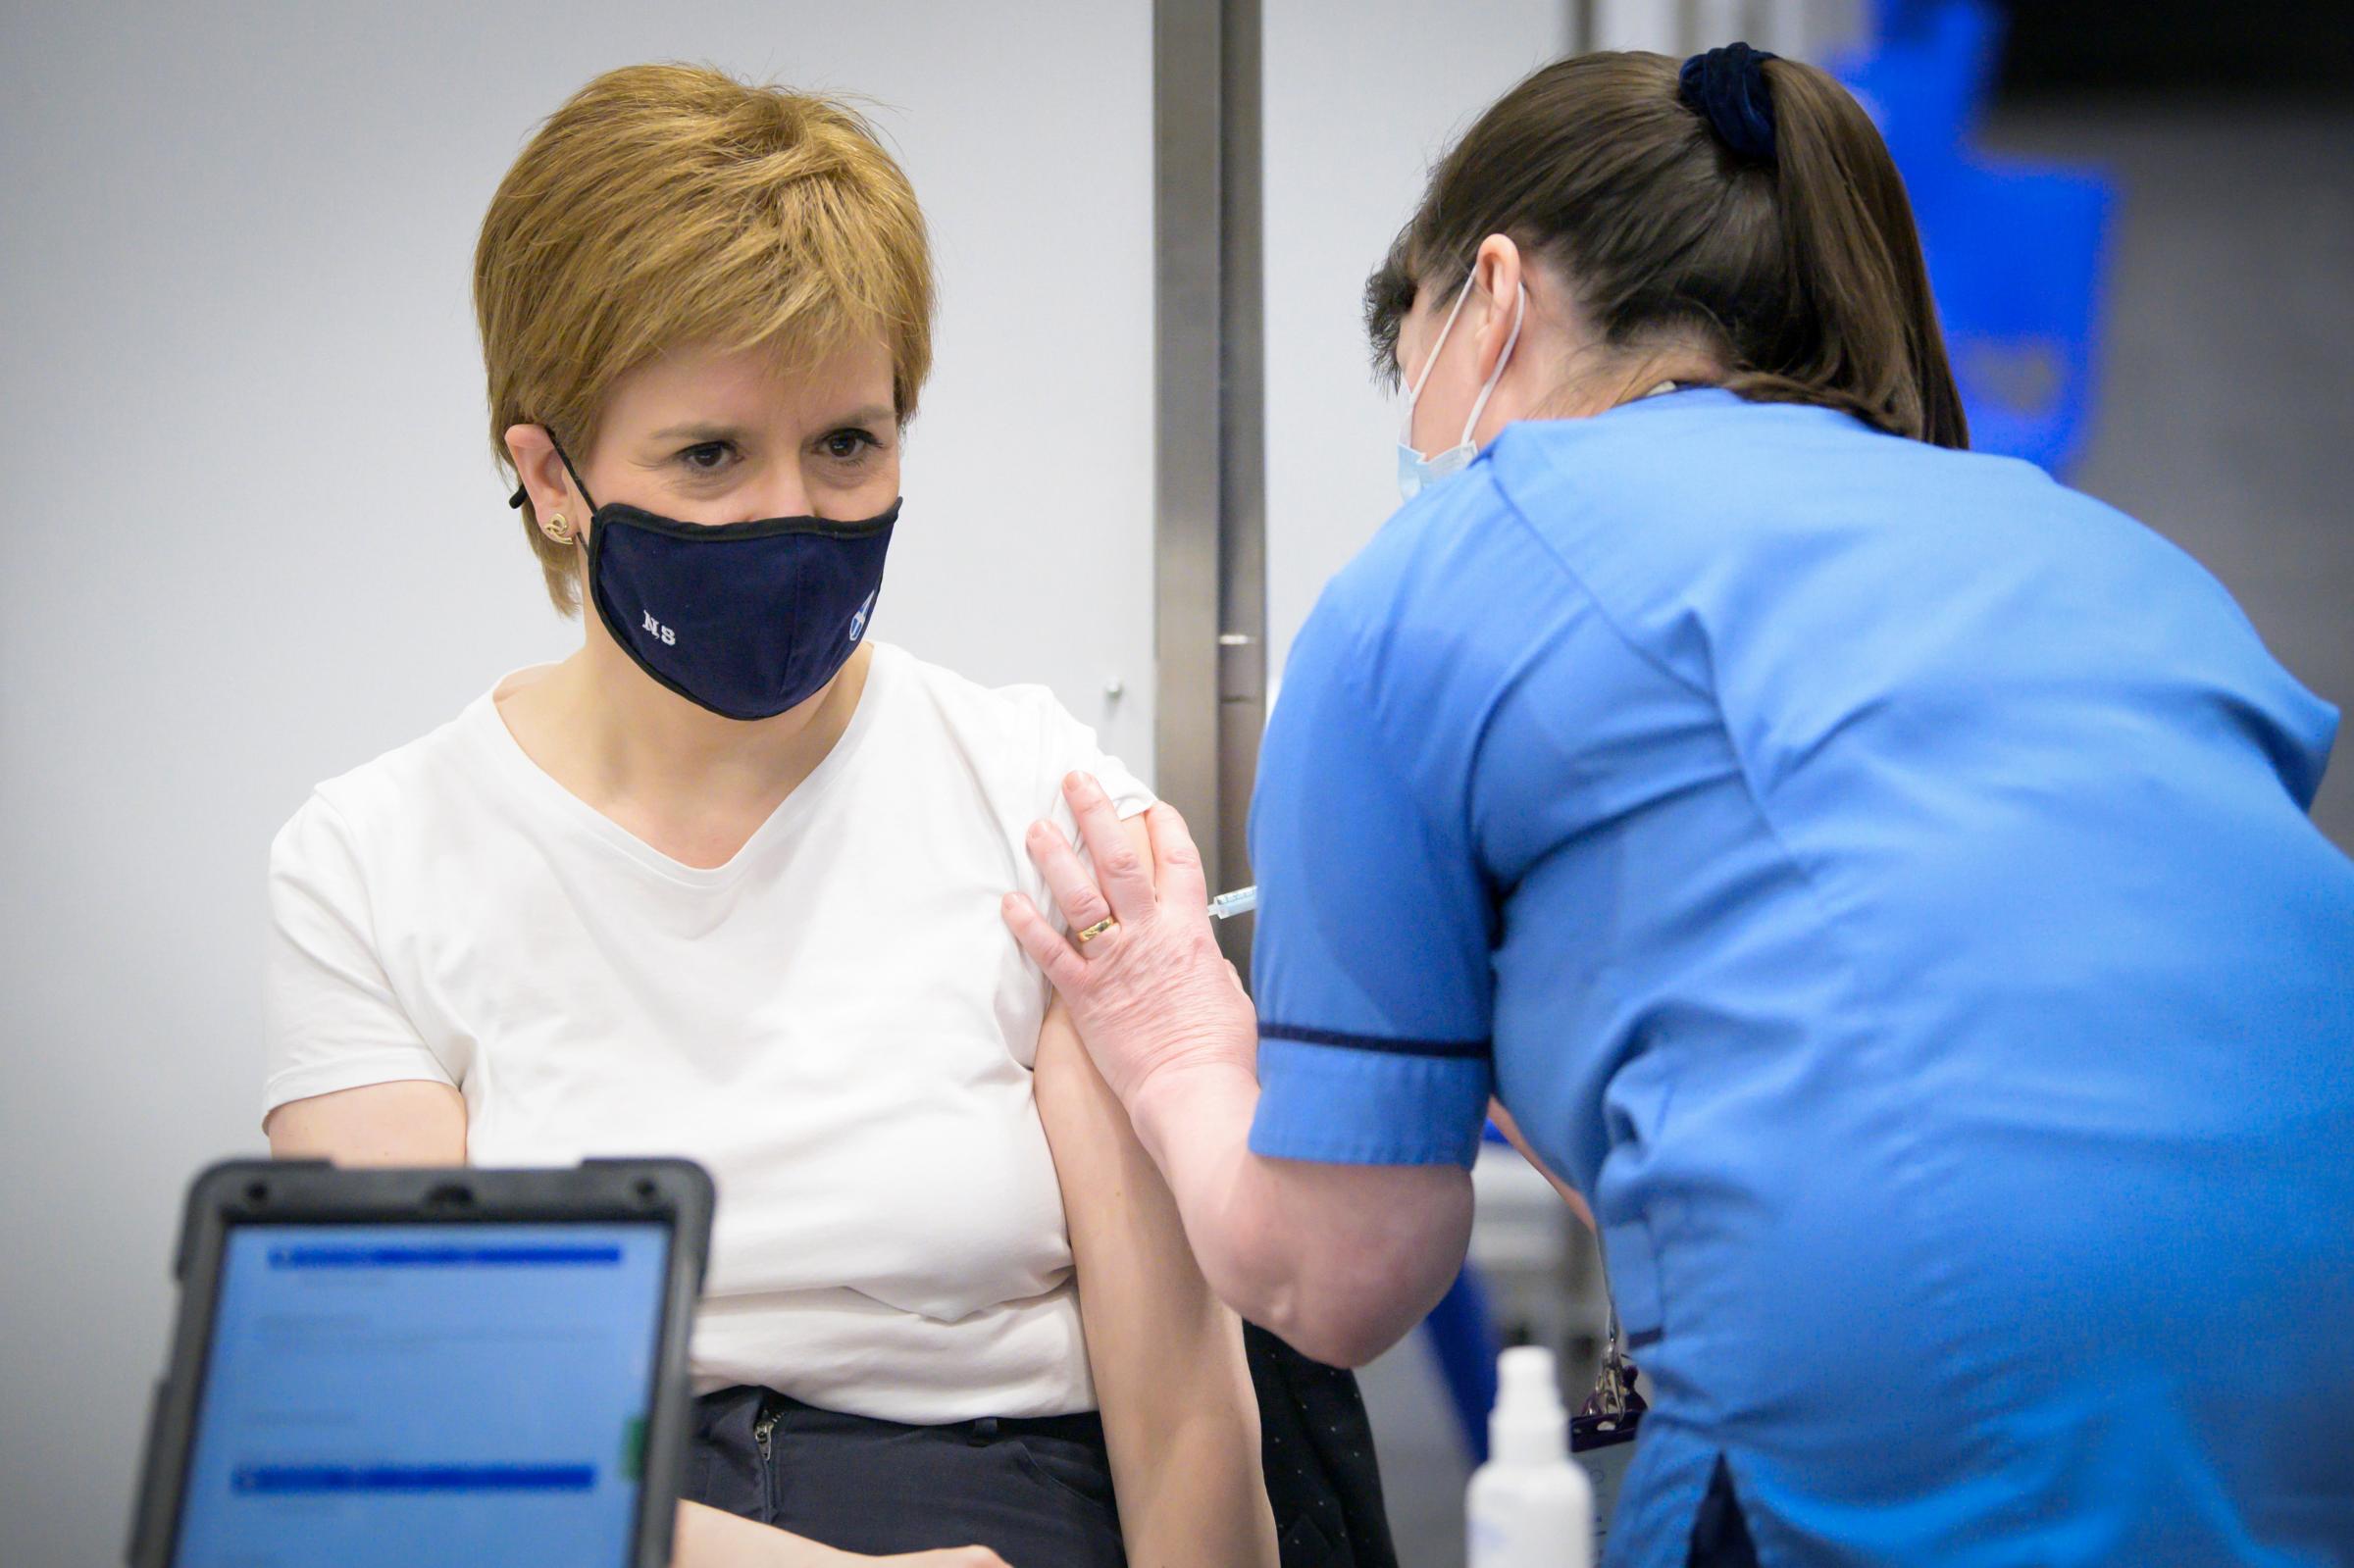 Nicola Sturgeon 'emotional’ after receiving her first Covid vaccine